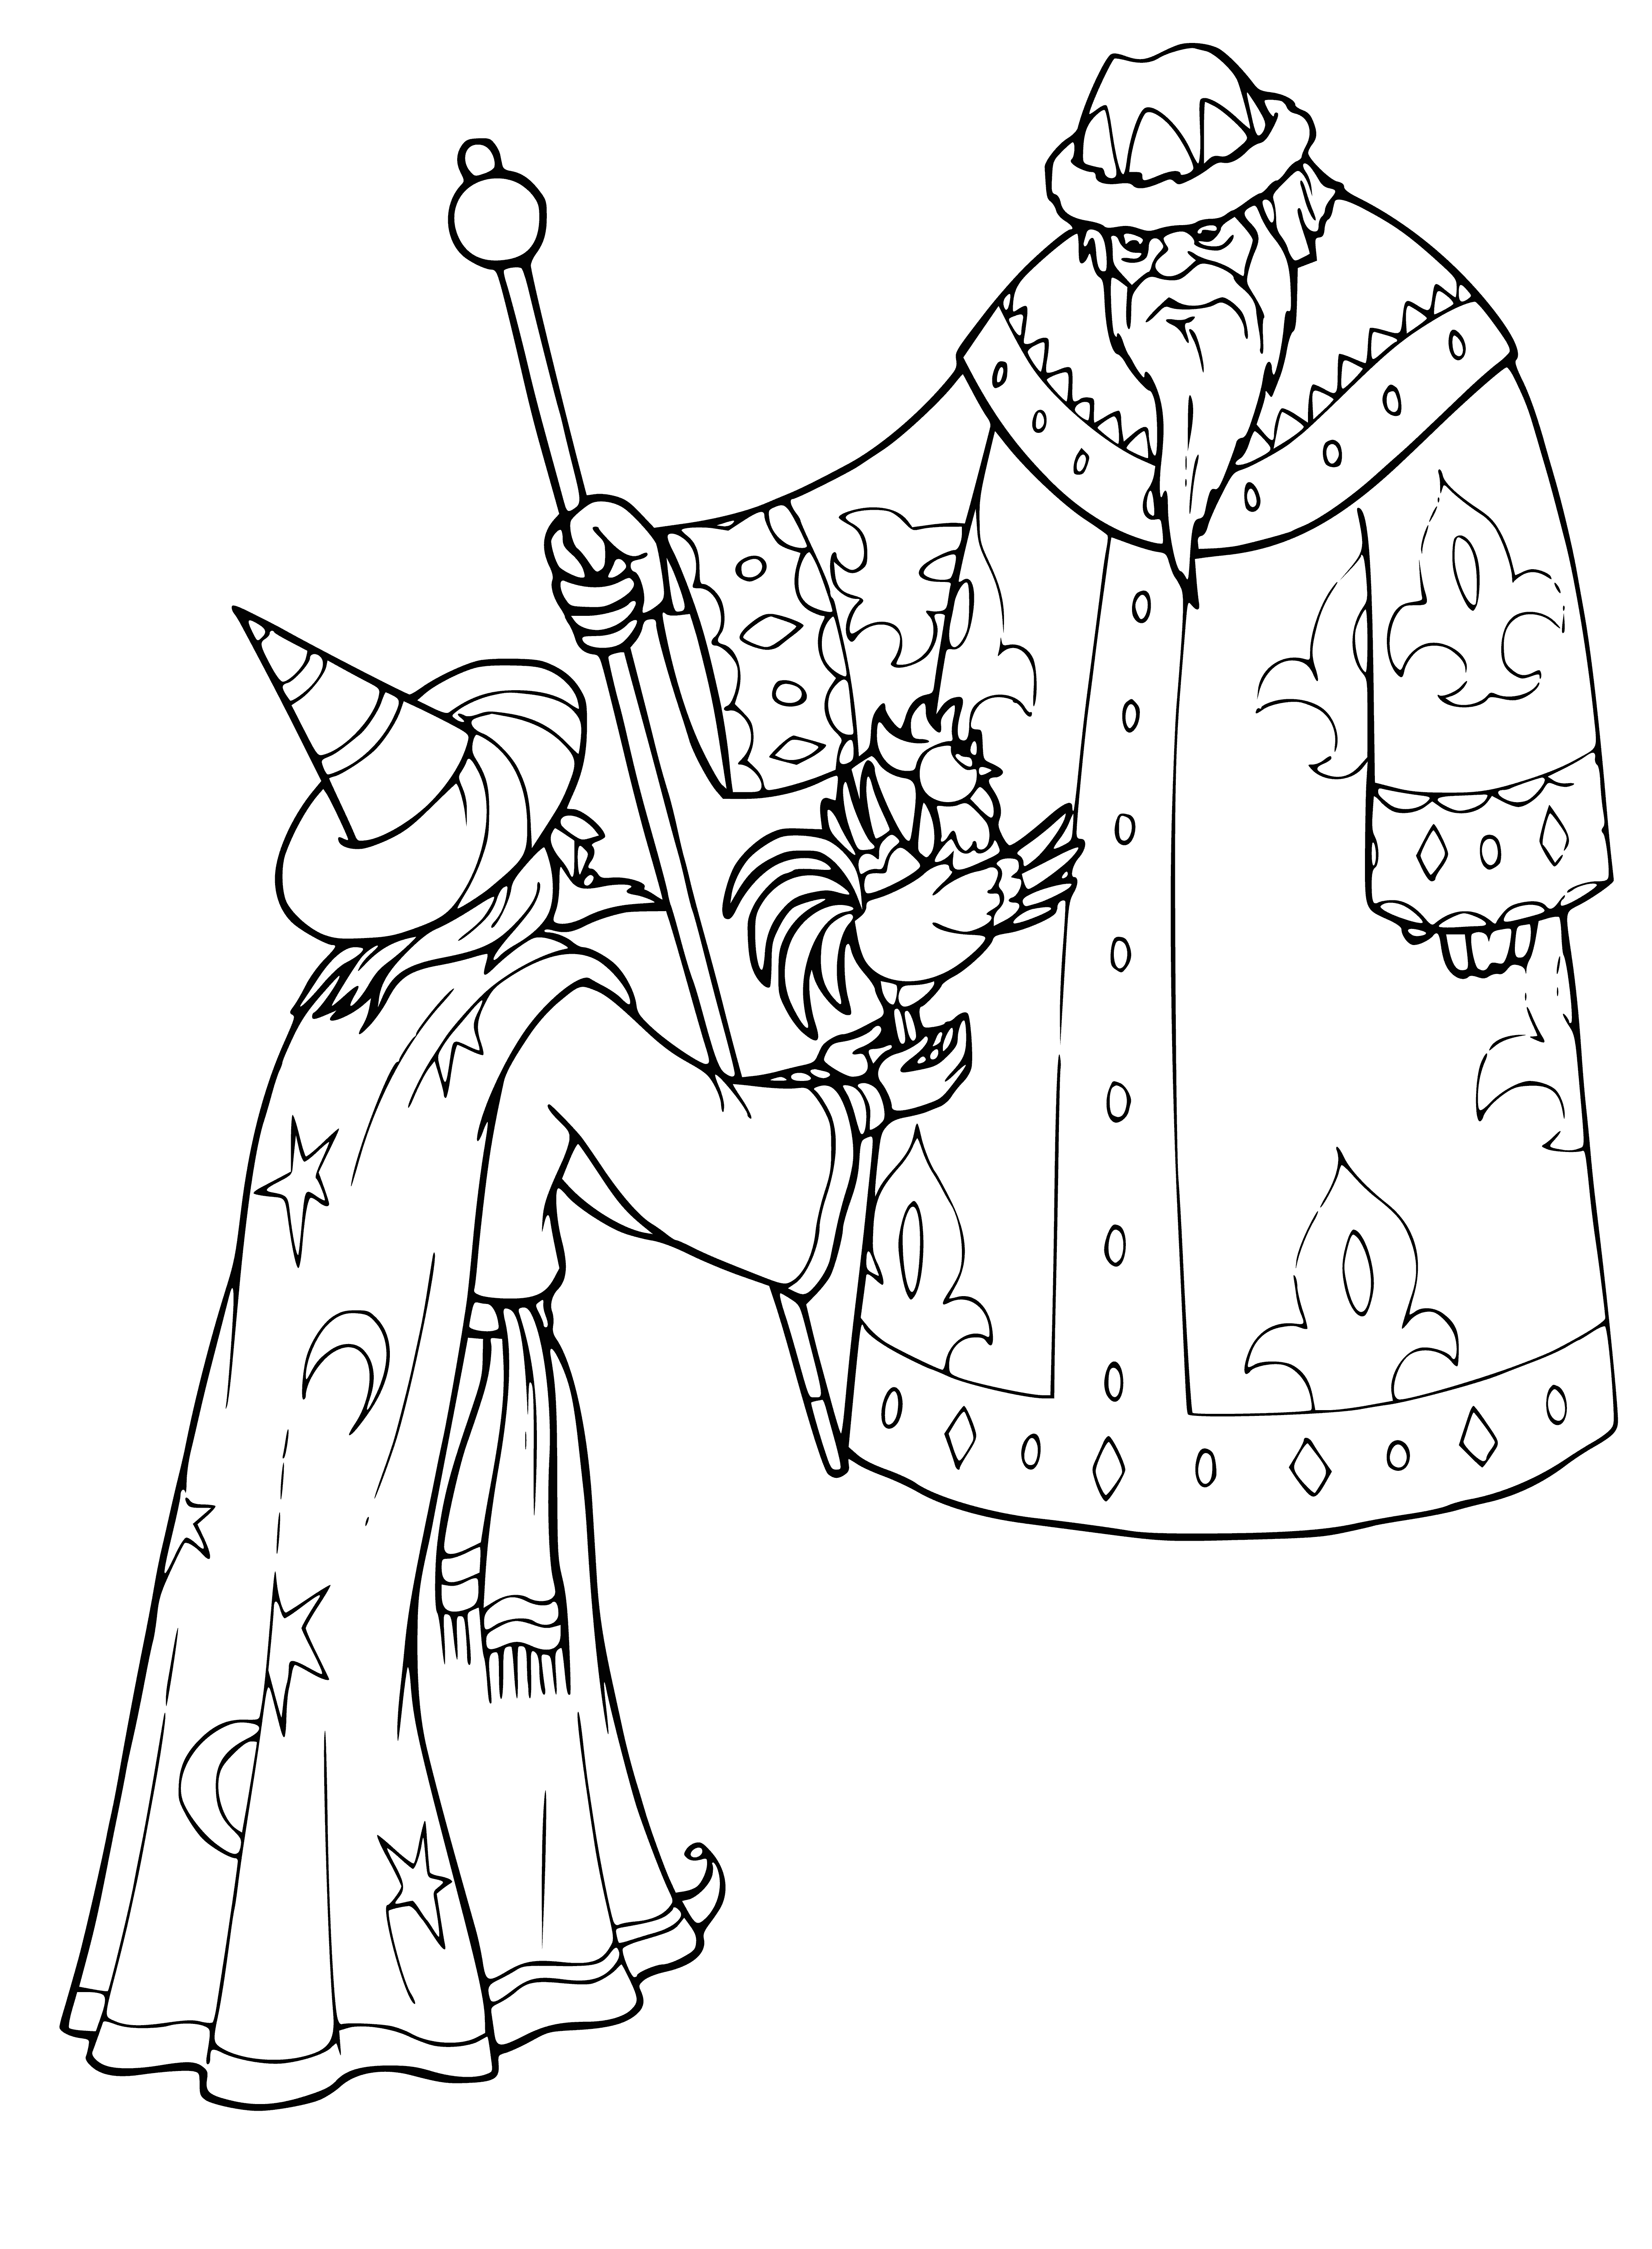 coloring page: Young man in light coat & 3-cornered hat looks through telescope. Bearded man observes him in blue coat in background.